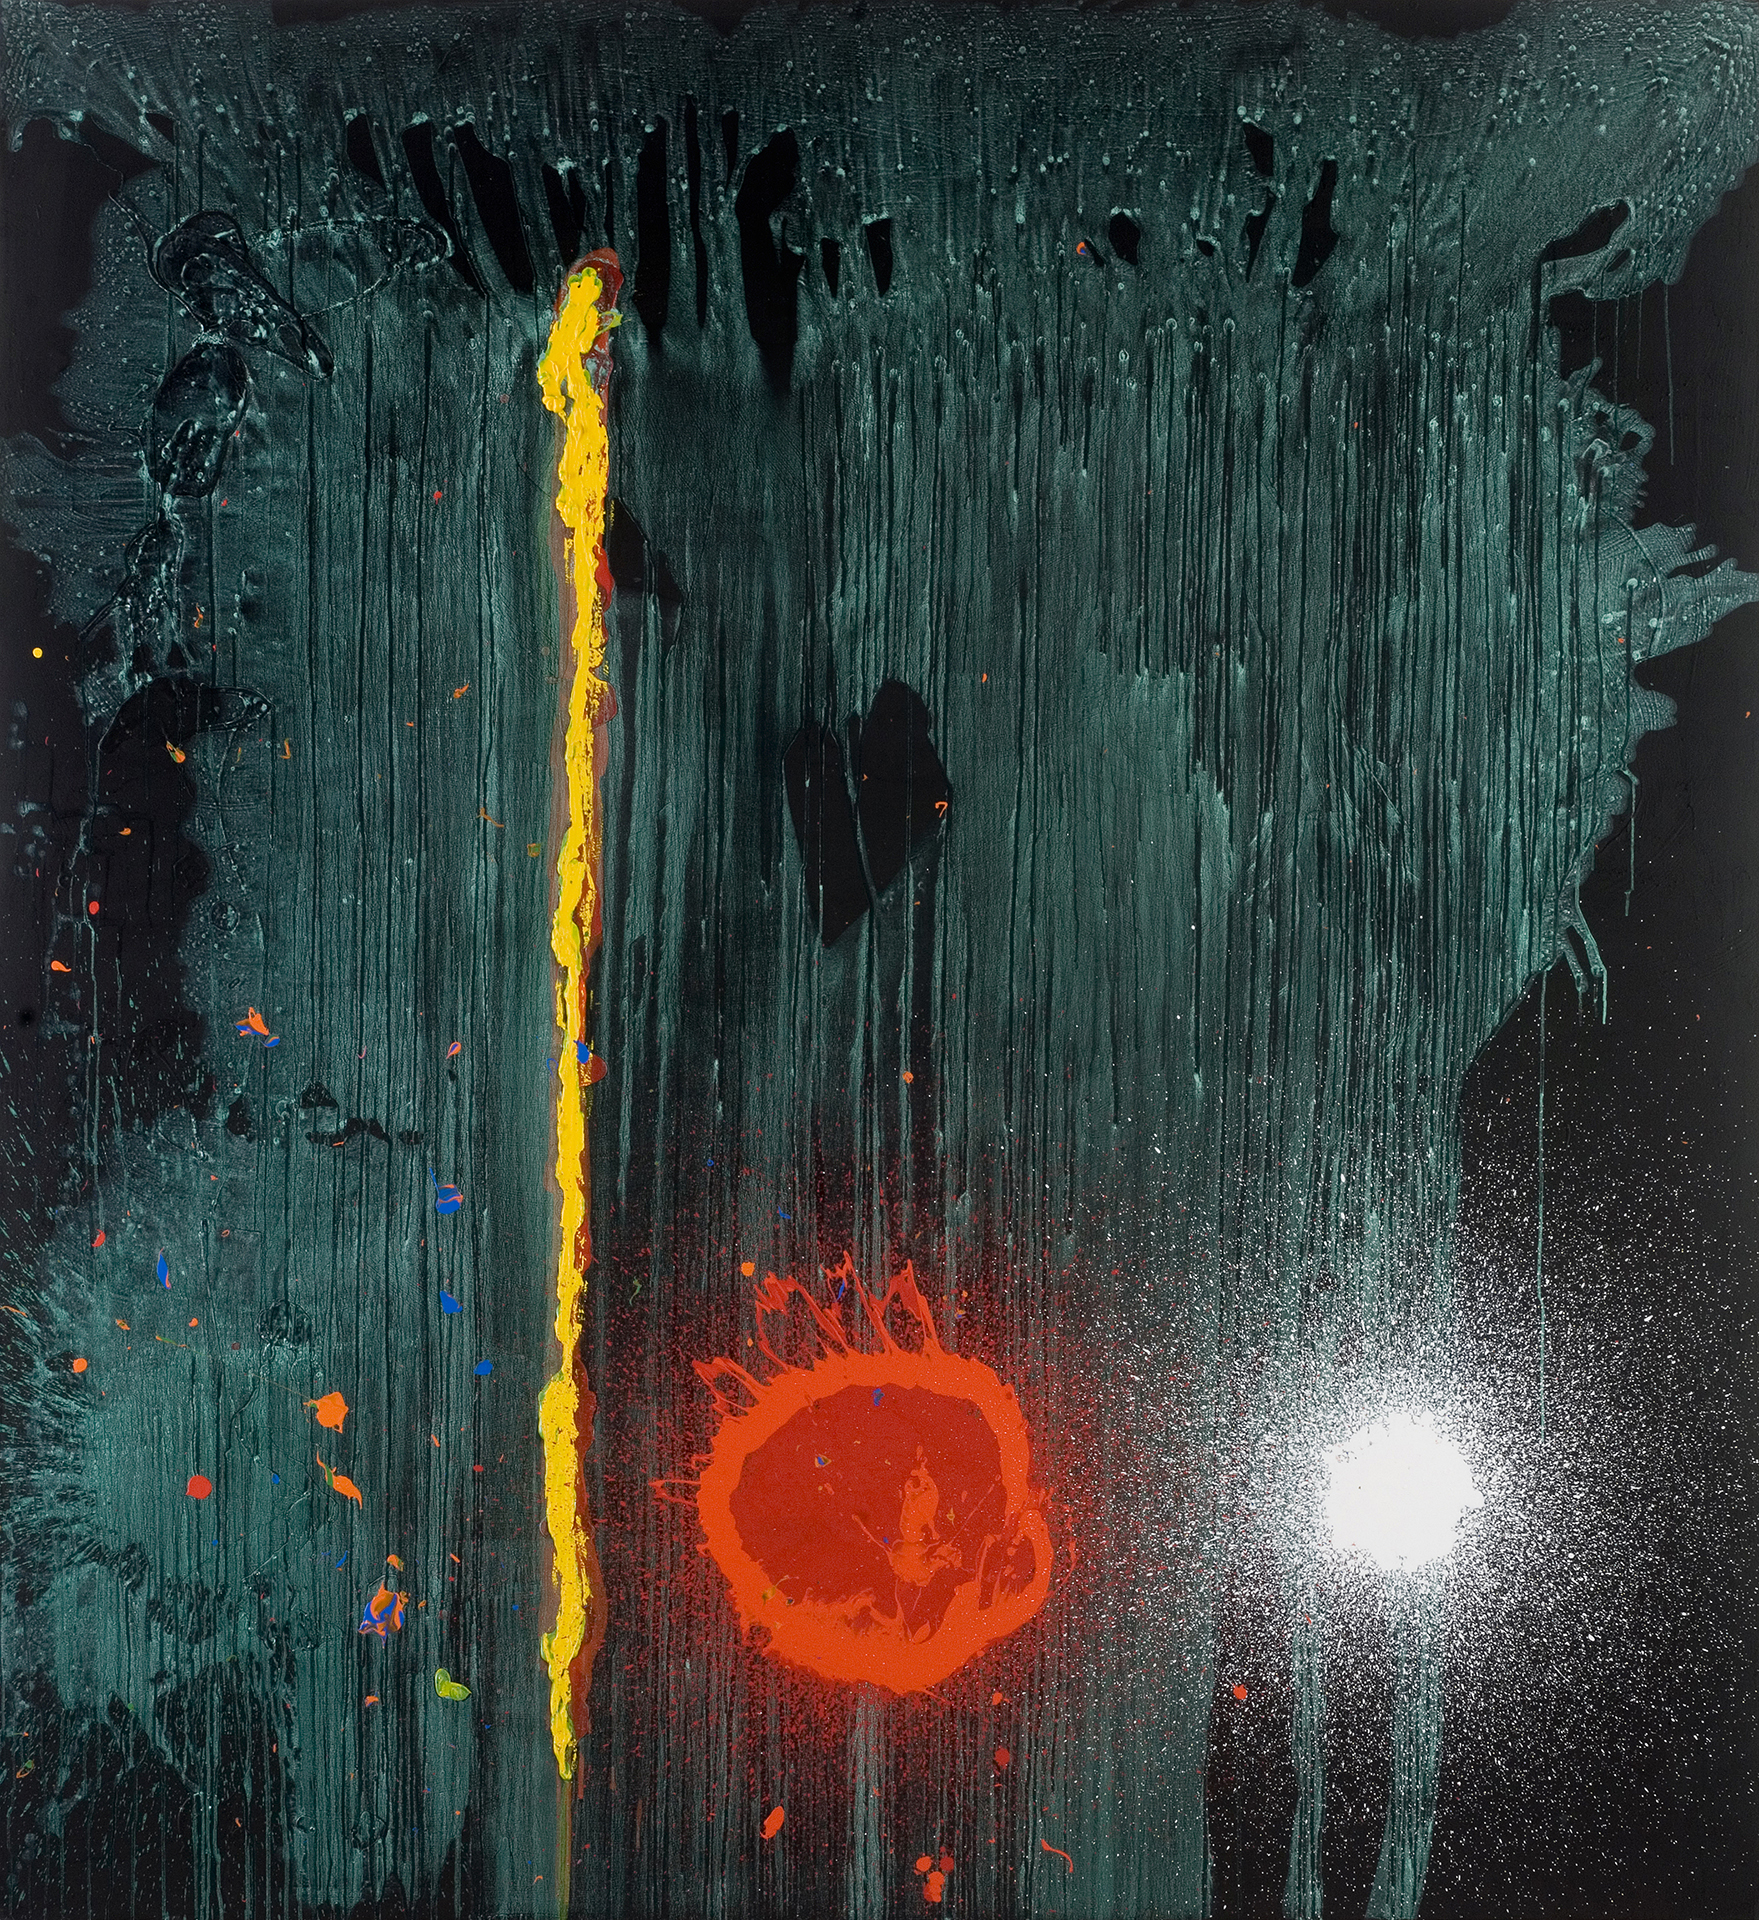 A vivid abstract painting in acrylic featuring a bright circular orange/red motif and a fiery vertical yellow streak on a turquoise and navy background.